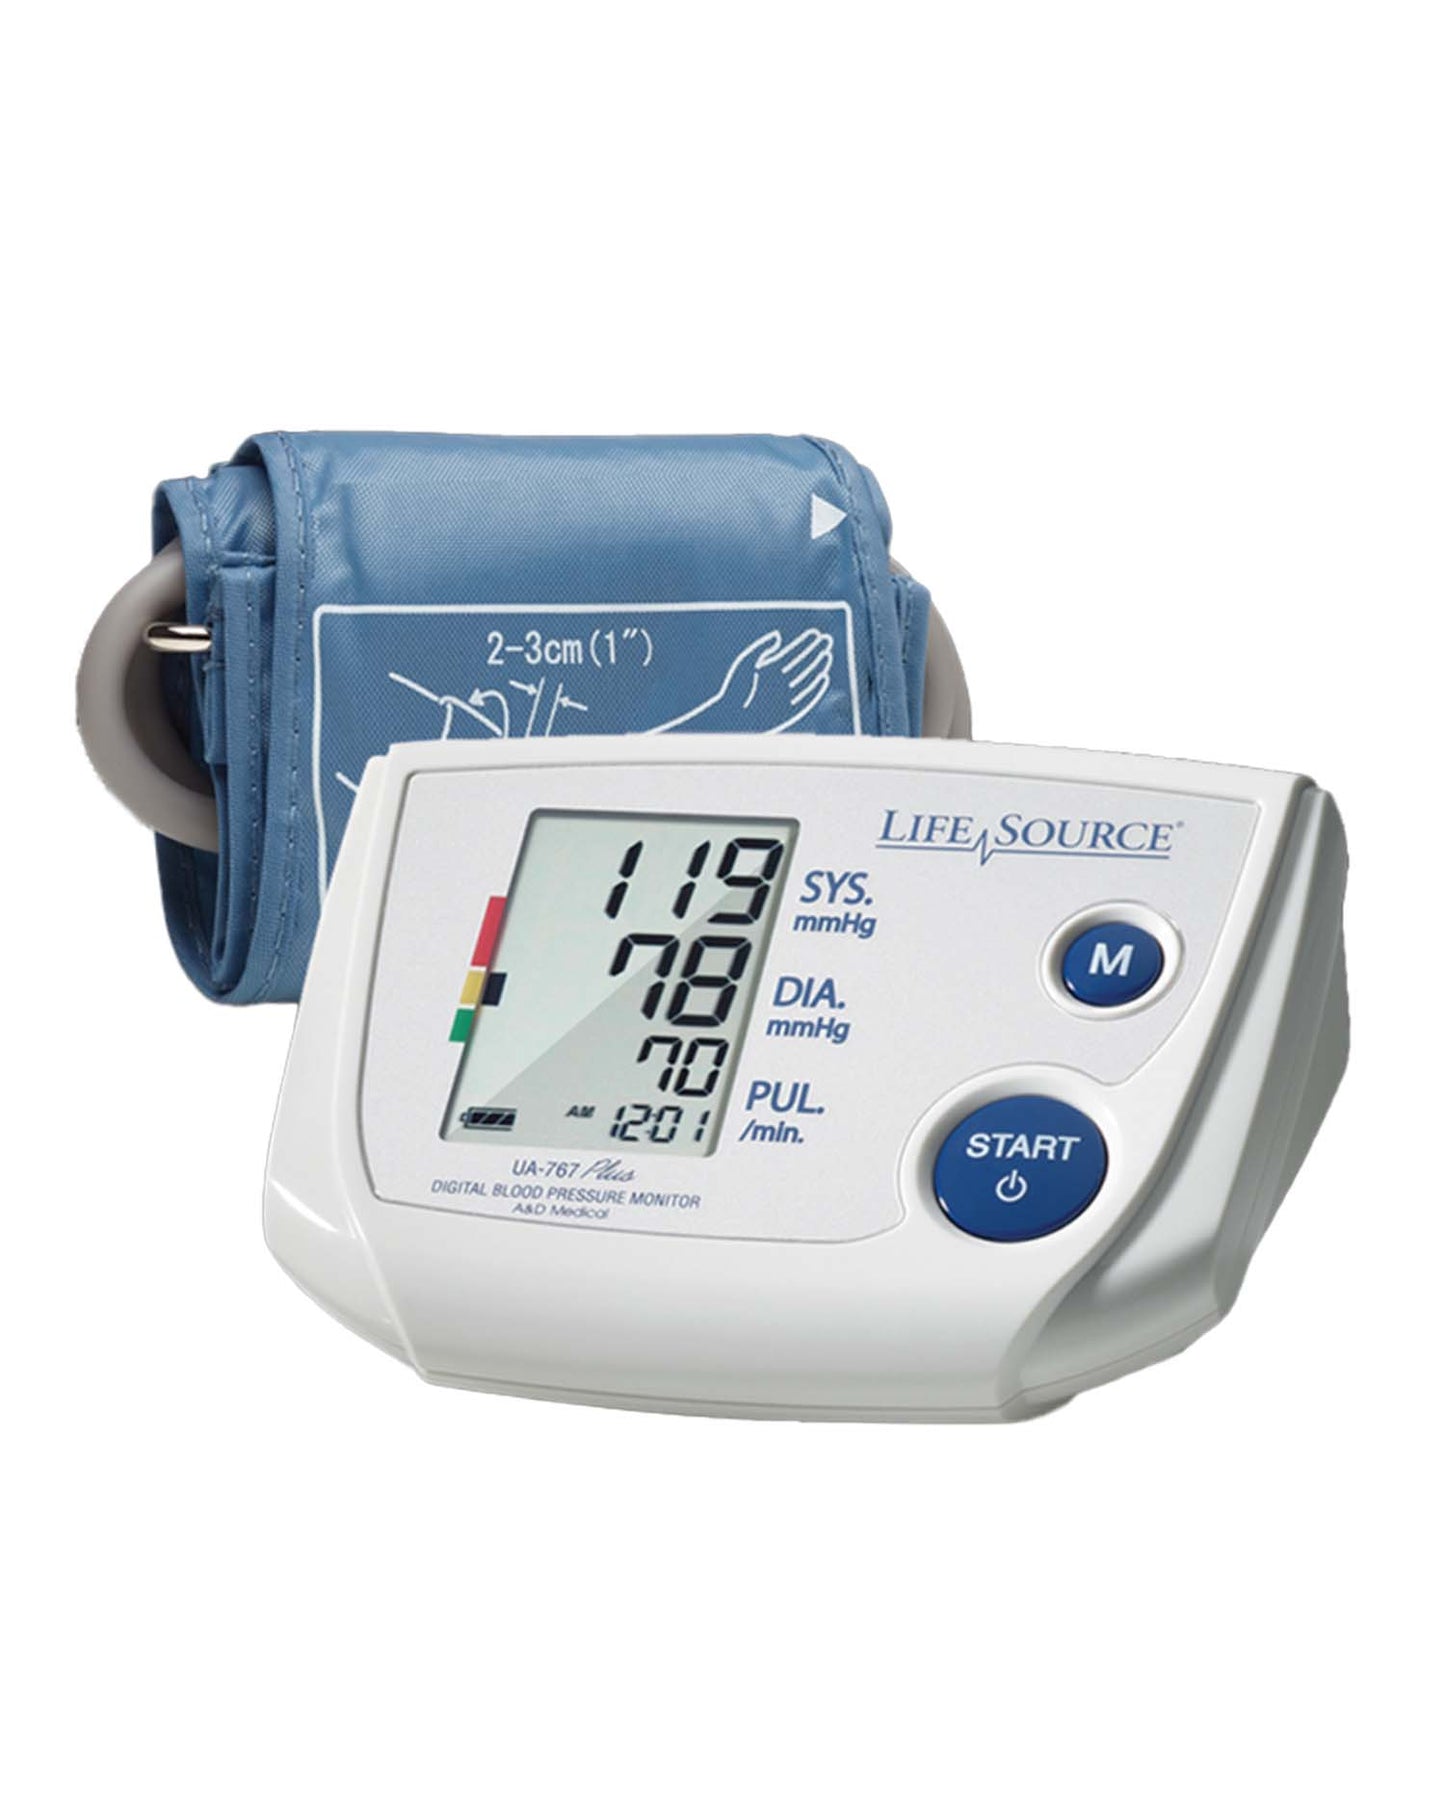 A/C Adapter for SPBP-04 Blood Pressure Monitor (894046001417-AC)